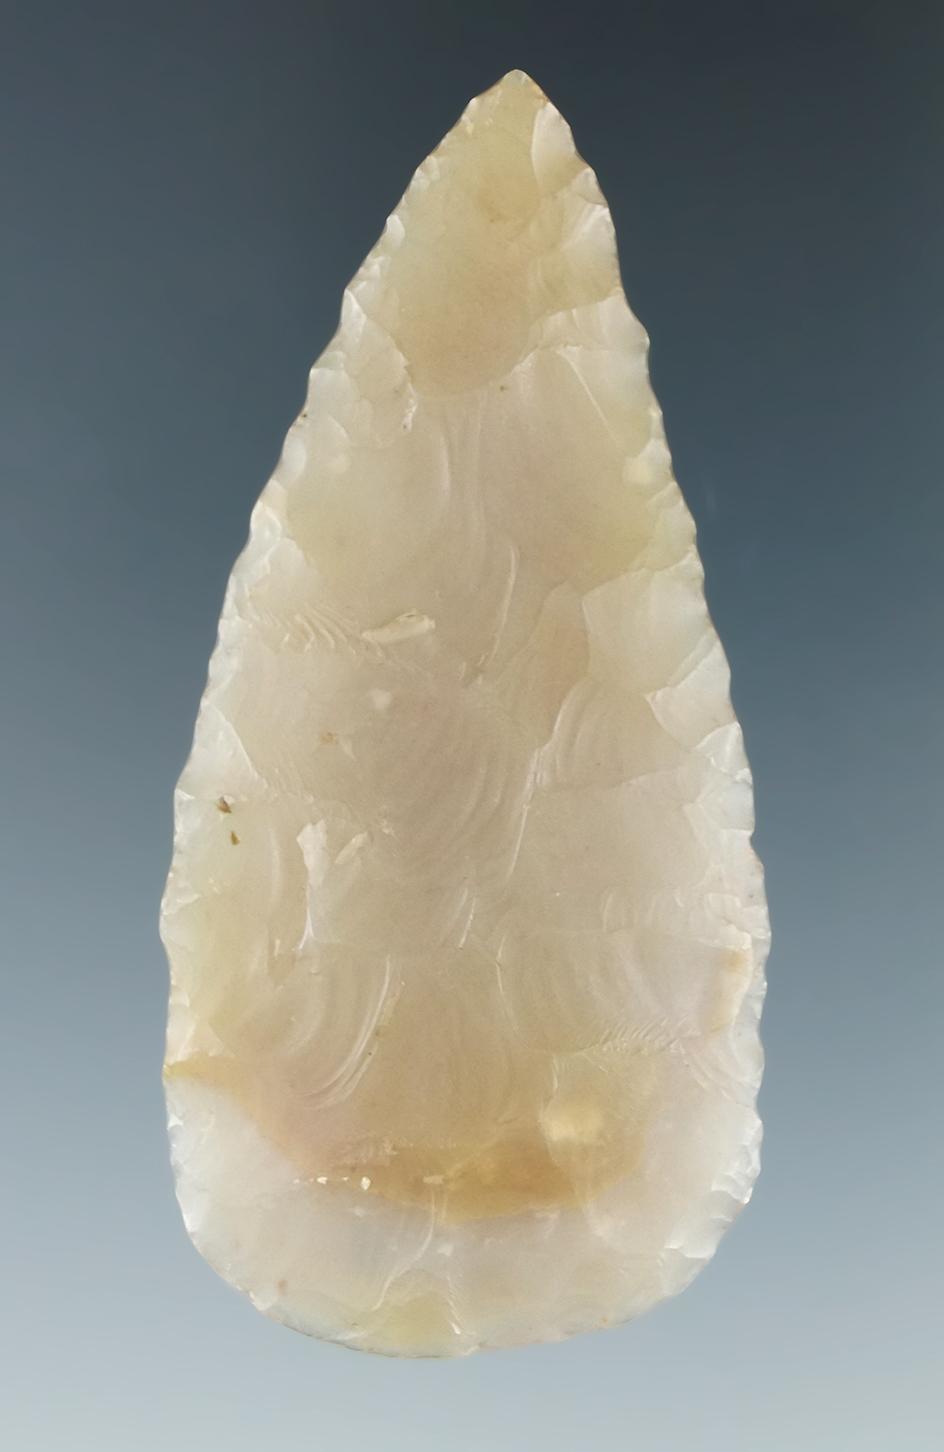 Beautiful material! 2 5/8" Adena Knife made from highly translucent Flint Ridge Flint found in NY.